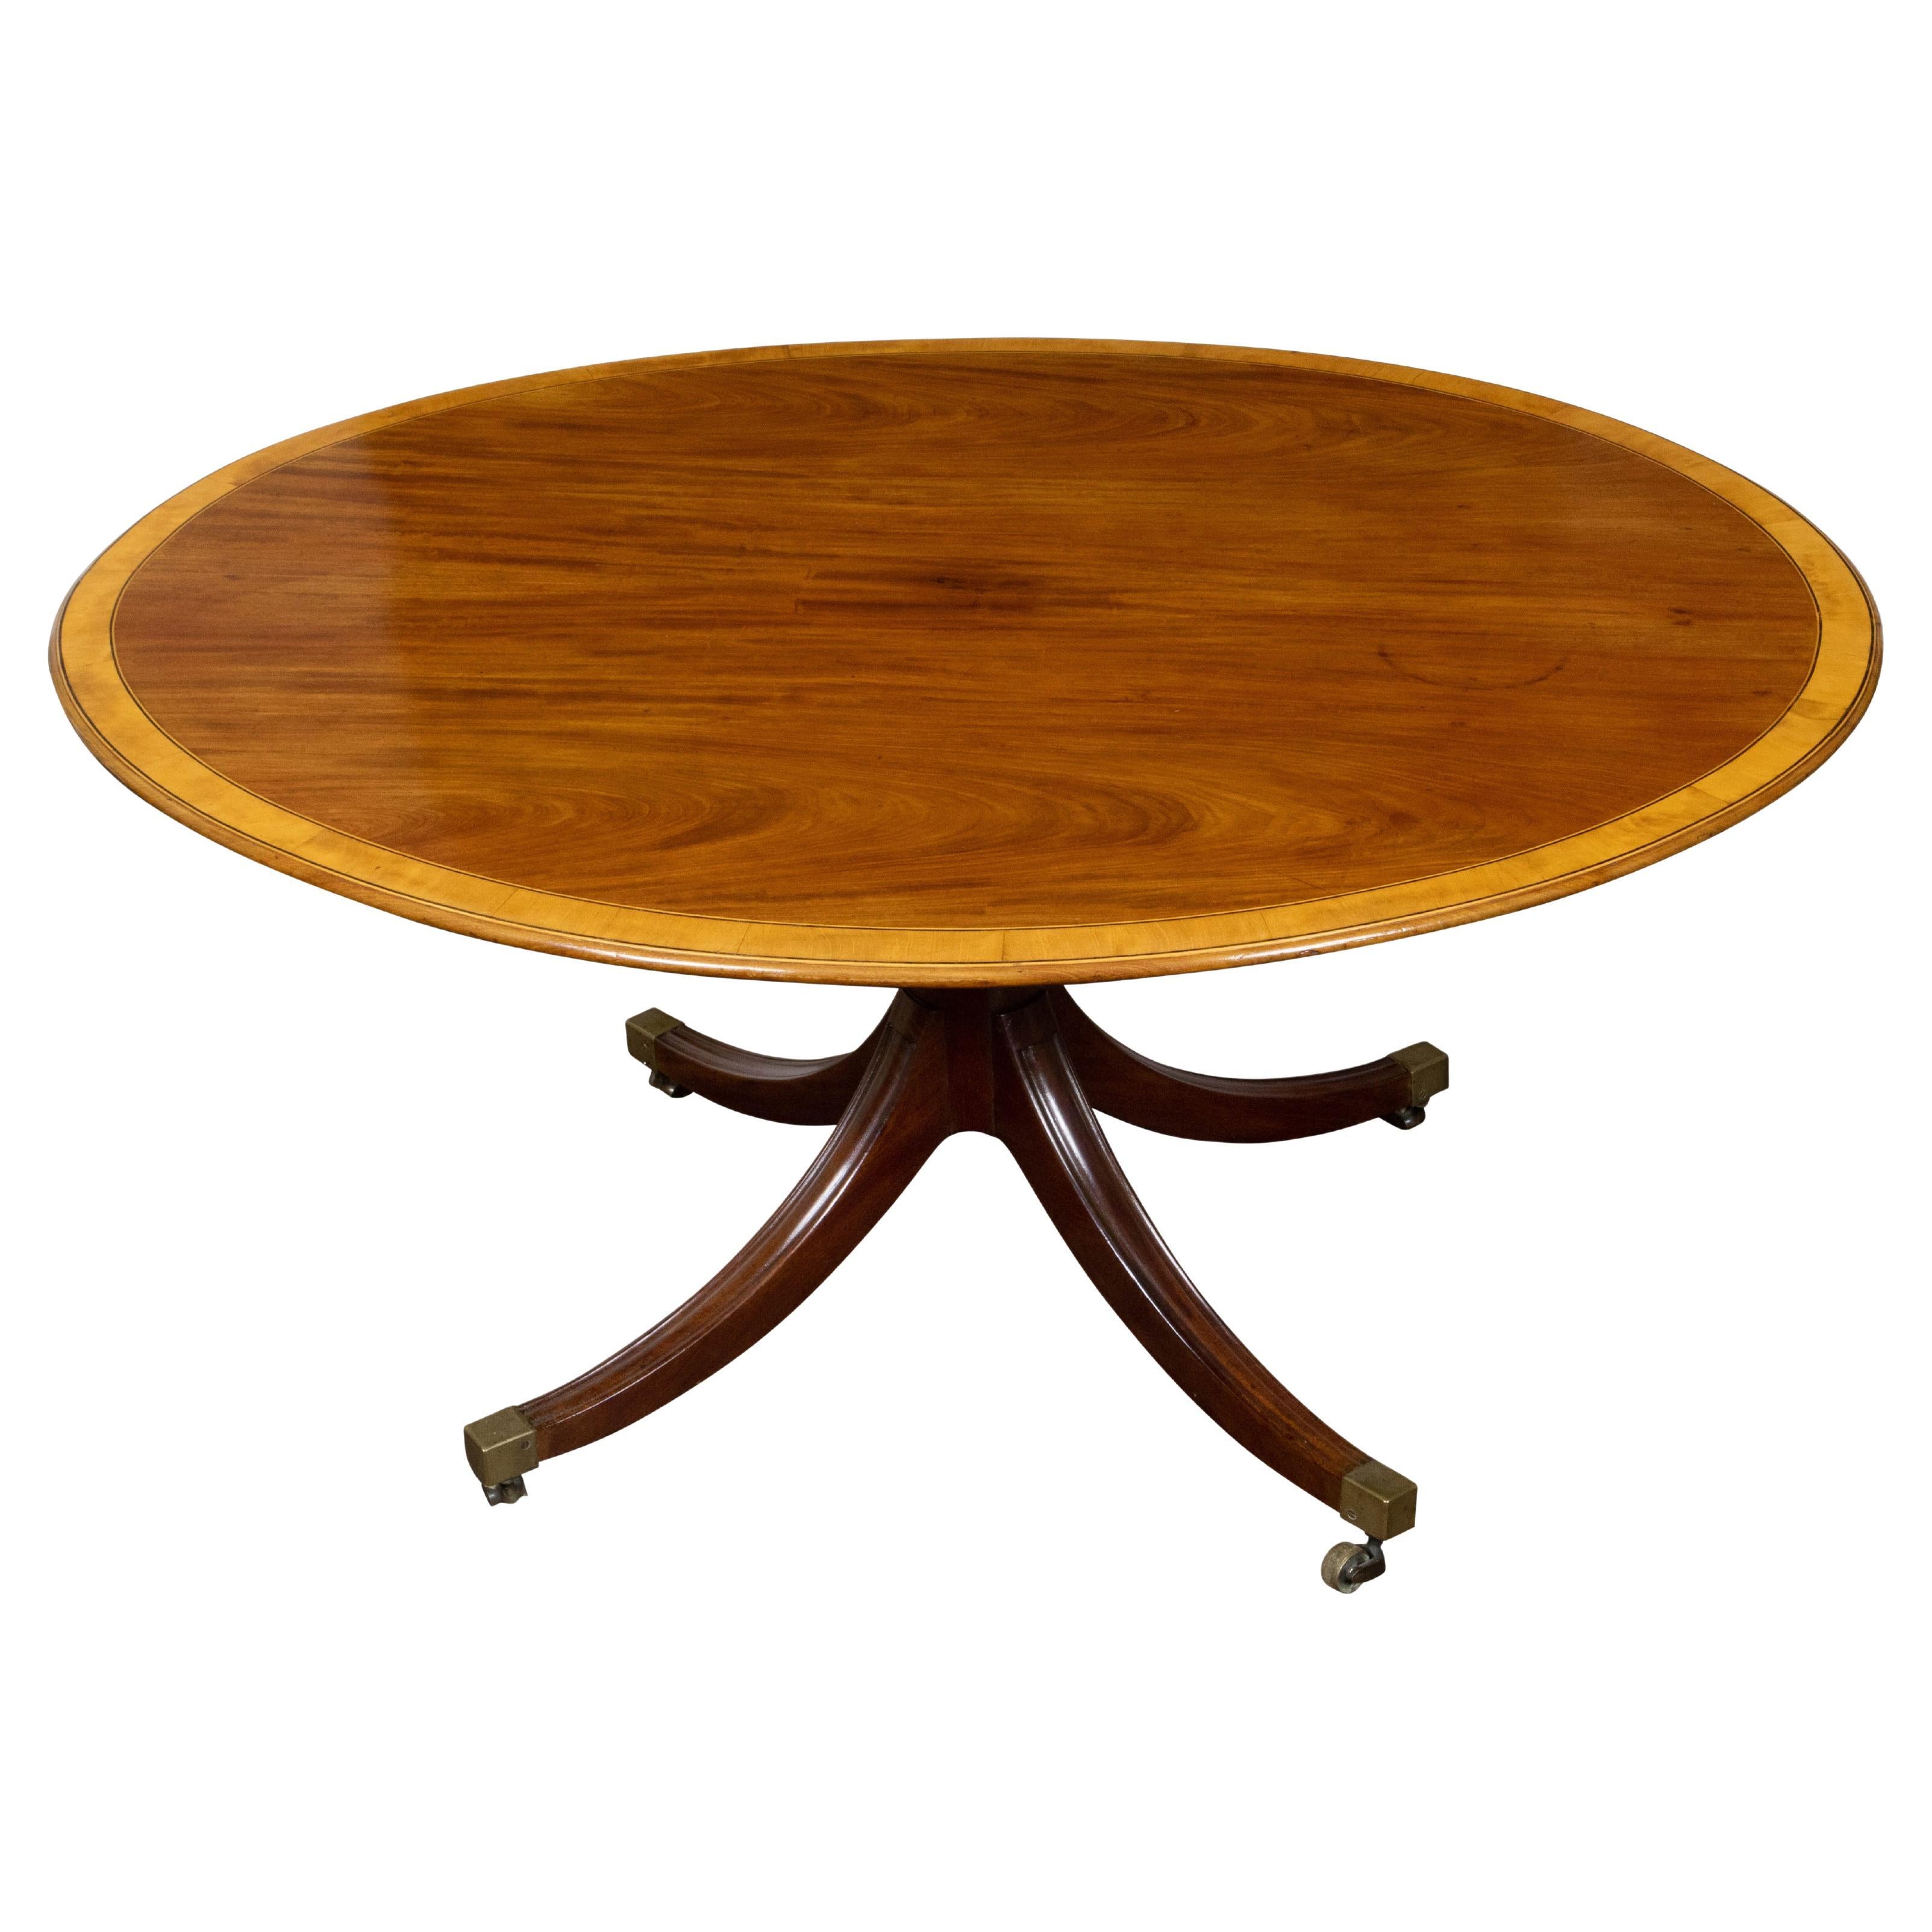 English Mahogany 1840s Oval Top Pedestal Table with Quadripod Base and Casters